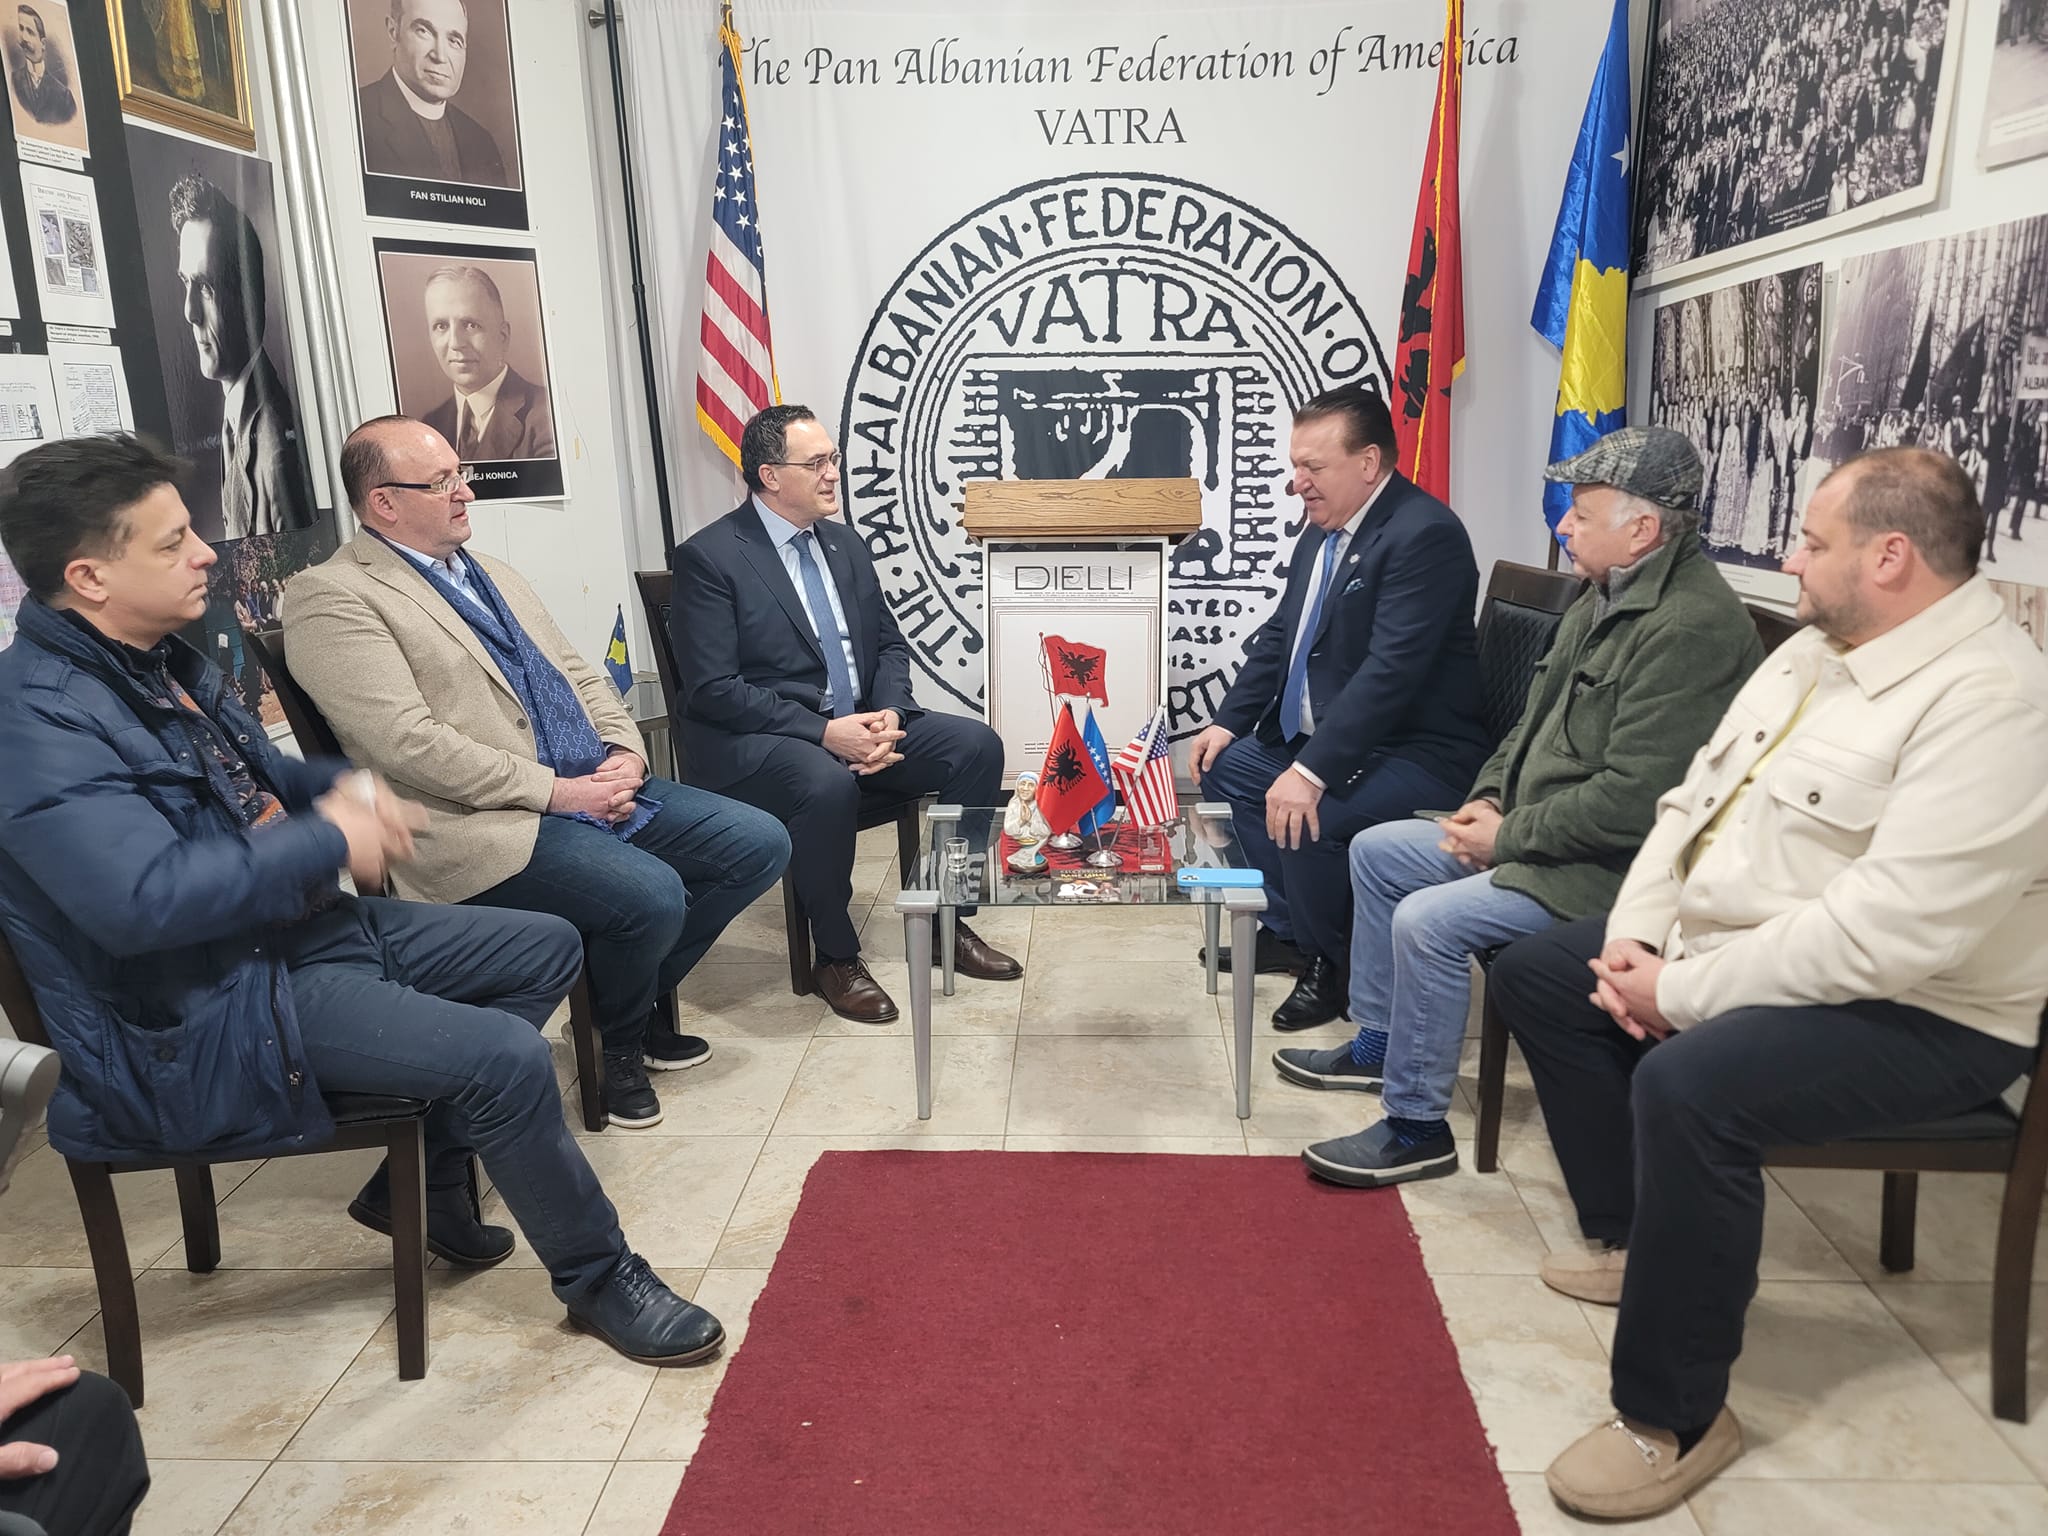 Rector Hajrizi Conducts Official Visit to the Pan-Albanian Federation of America “Vatra”